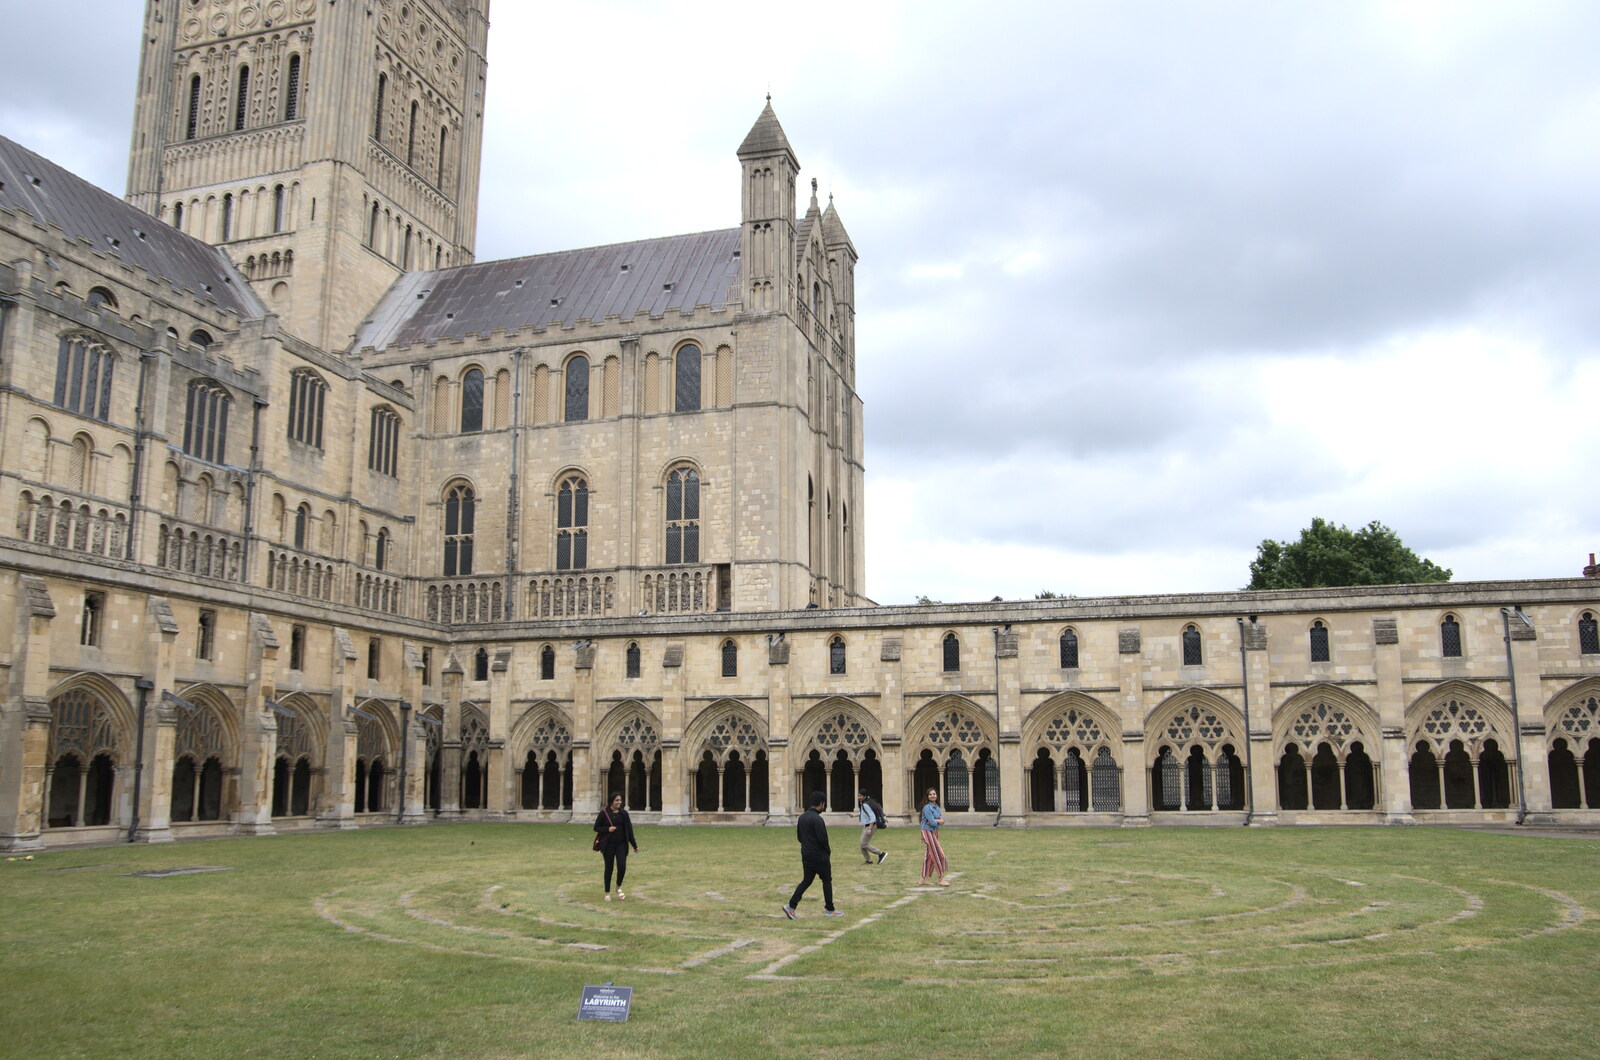 People run around in the Cloisters Labyrinth from Discovering the Hidden City: Norwich, Norfolk - 23rd May 2022